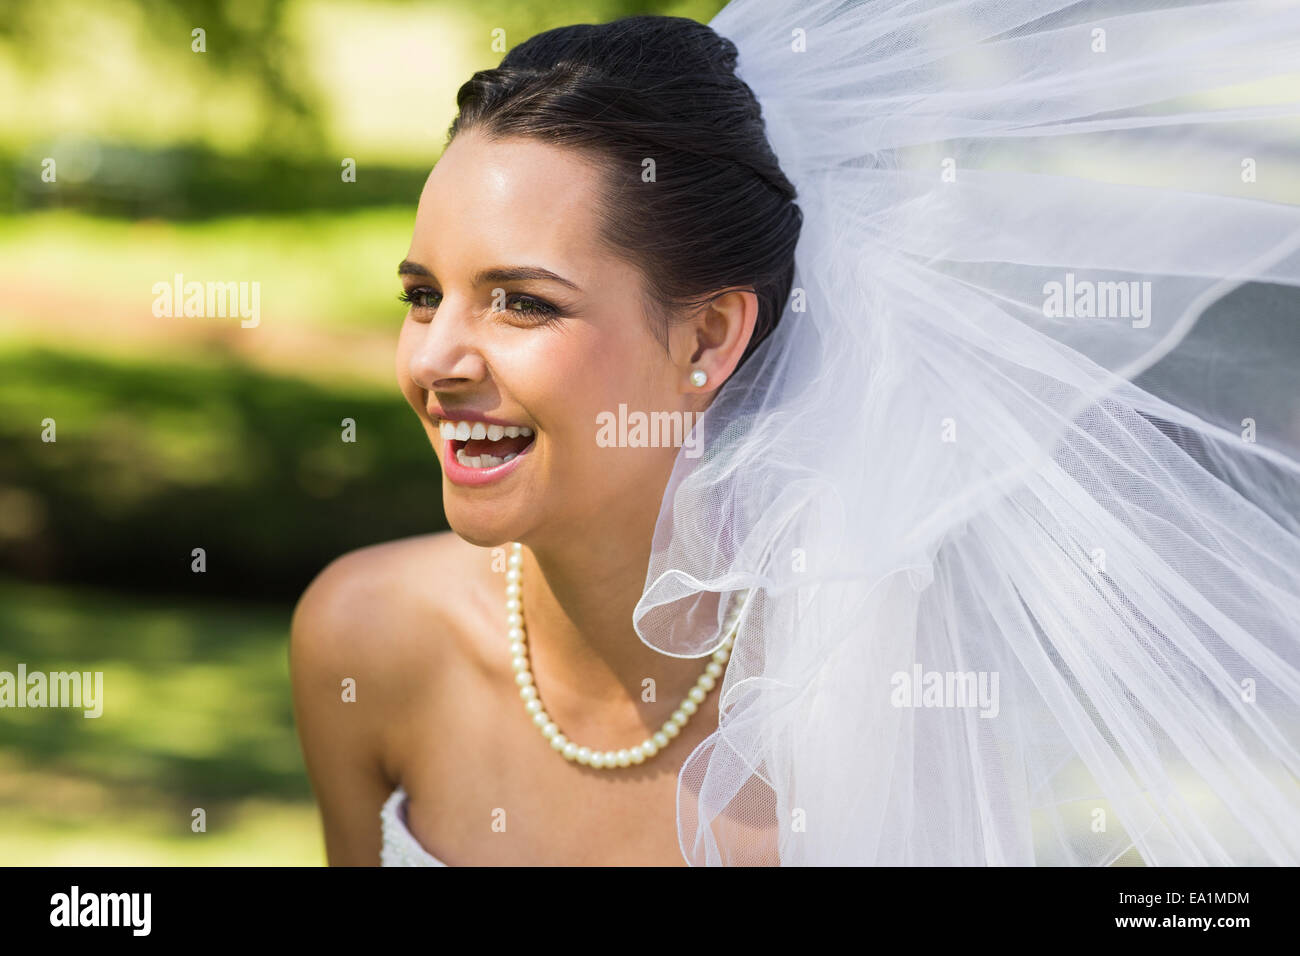 Cheerful young woman in park Banque D'Images